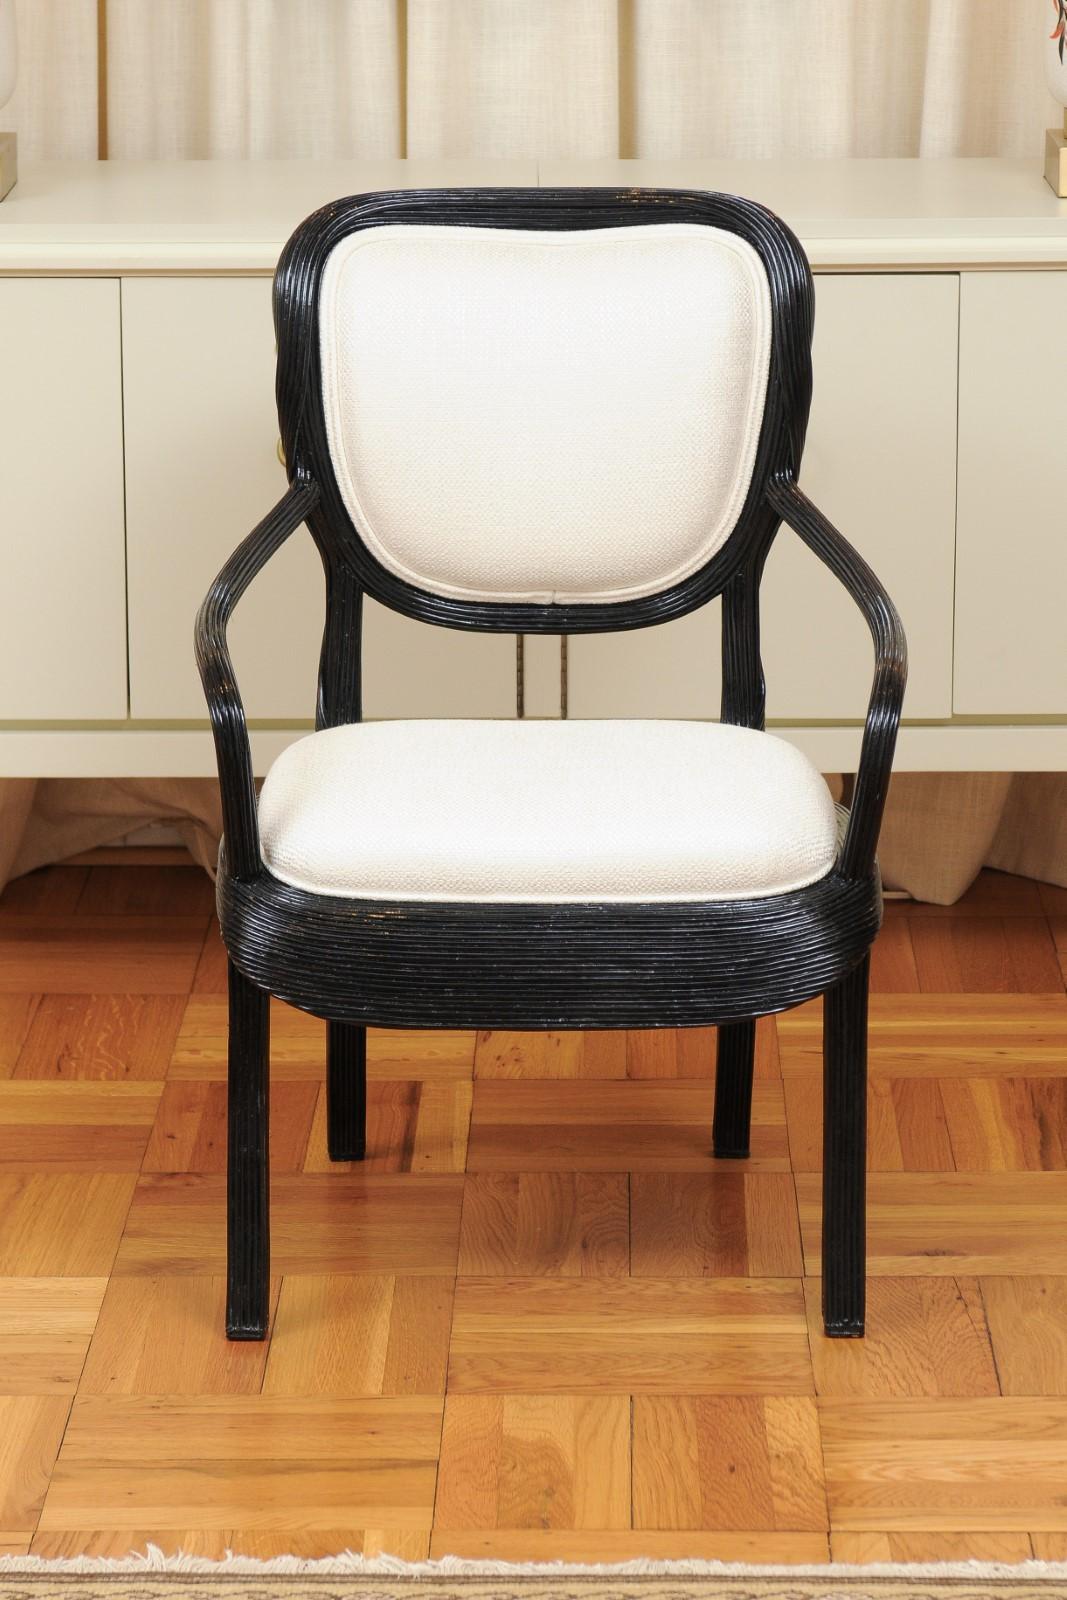 Extraordinary Set of 8 Trompe L'oiel Dining Chairs by Betty Cobonpue, circa 1980 For Sale 2